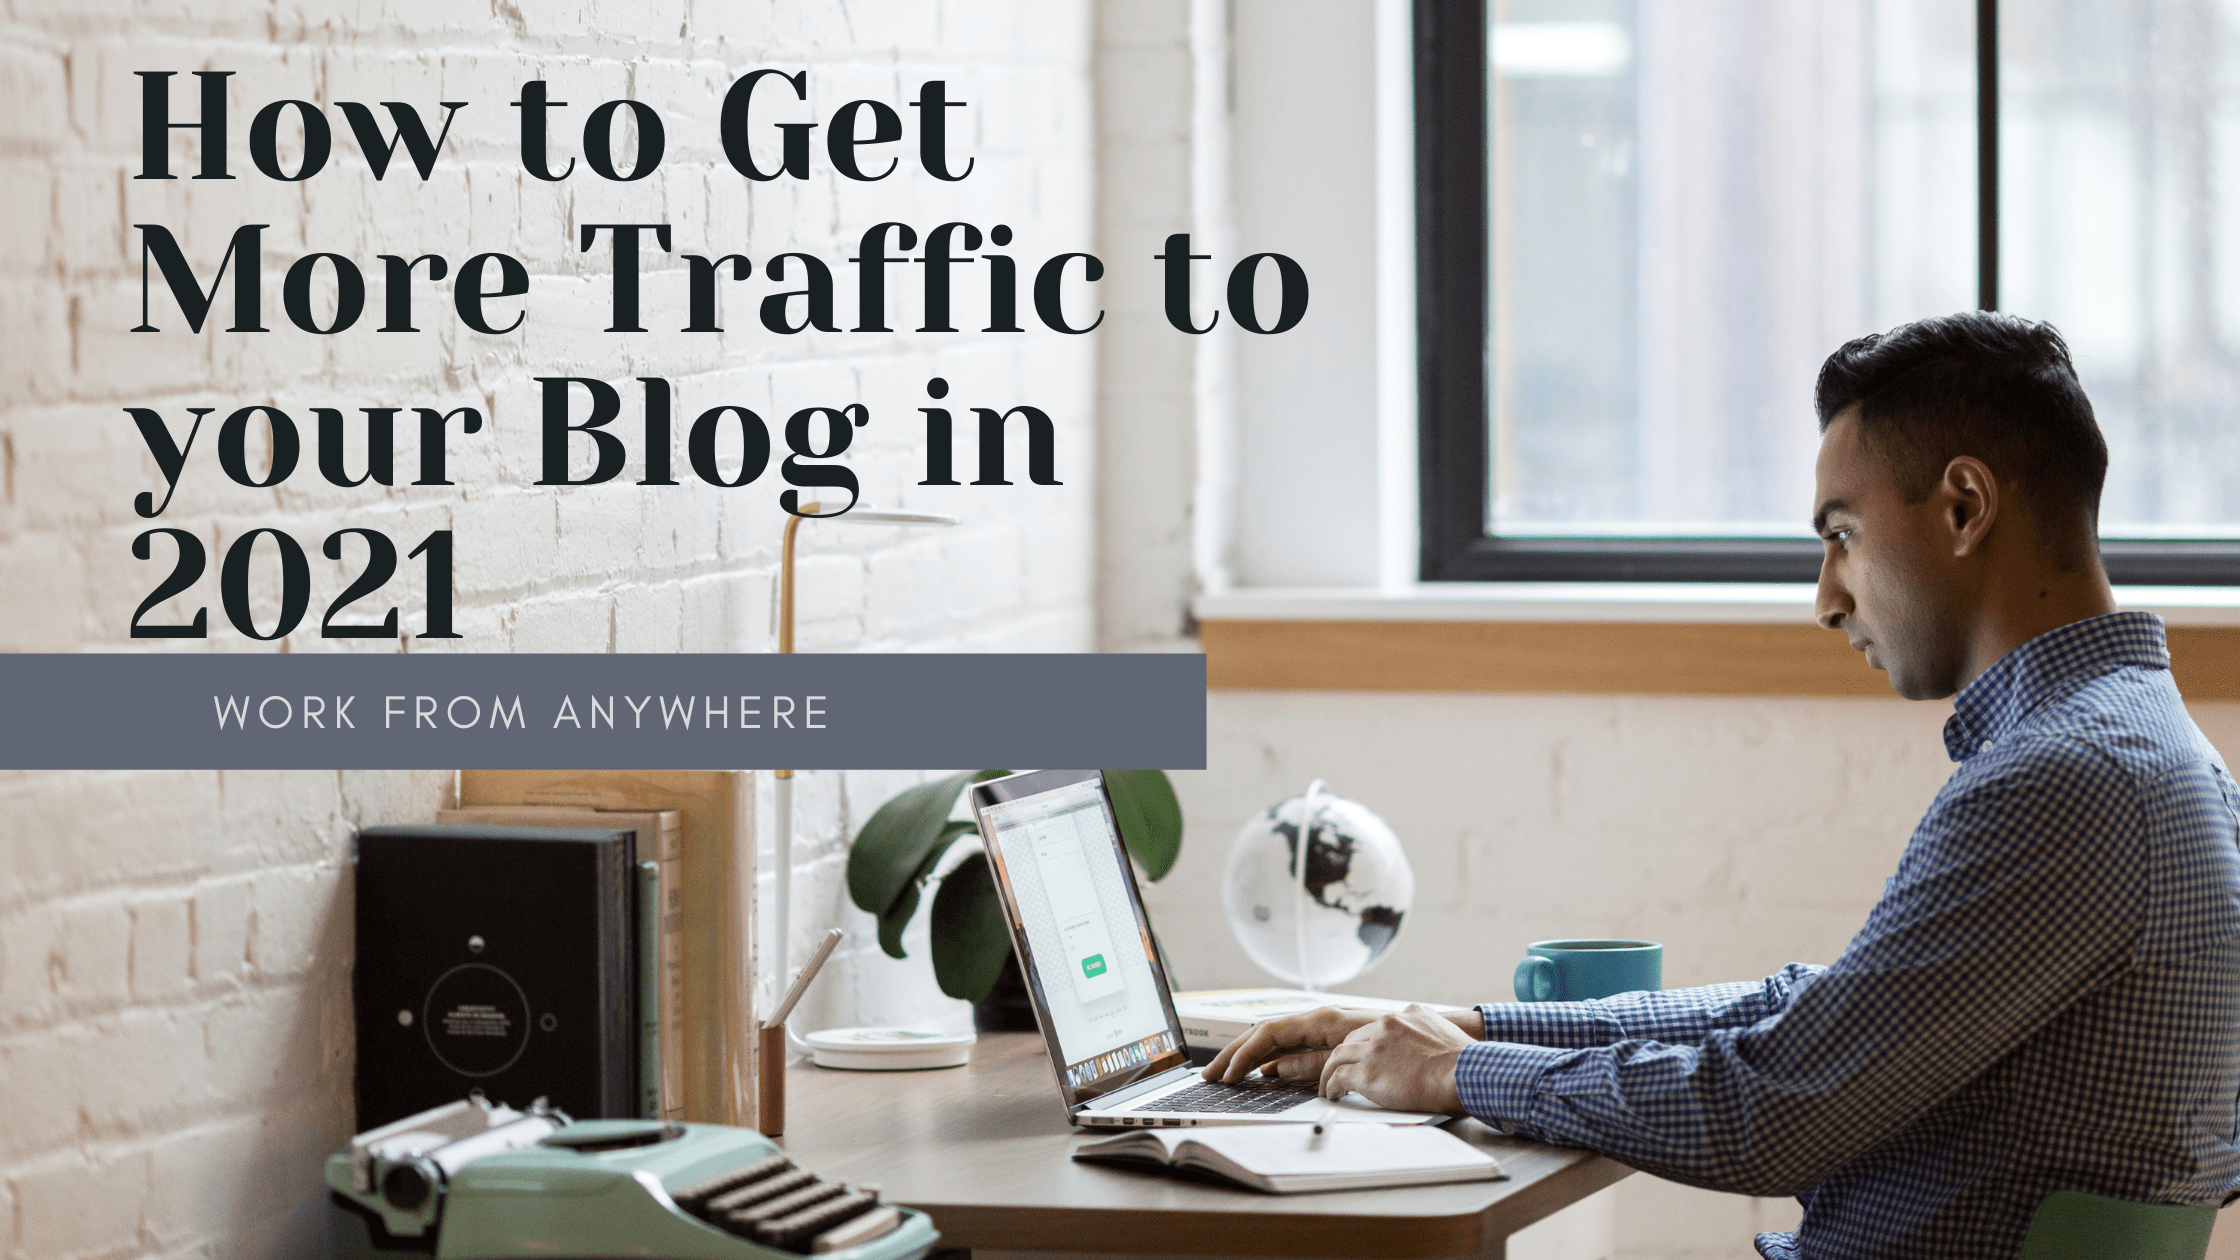 How to Get More Traffic to your Blog in 2021